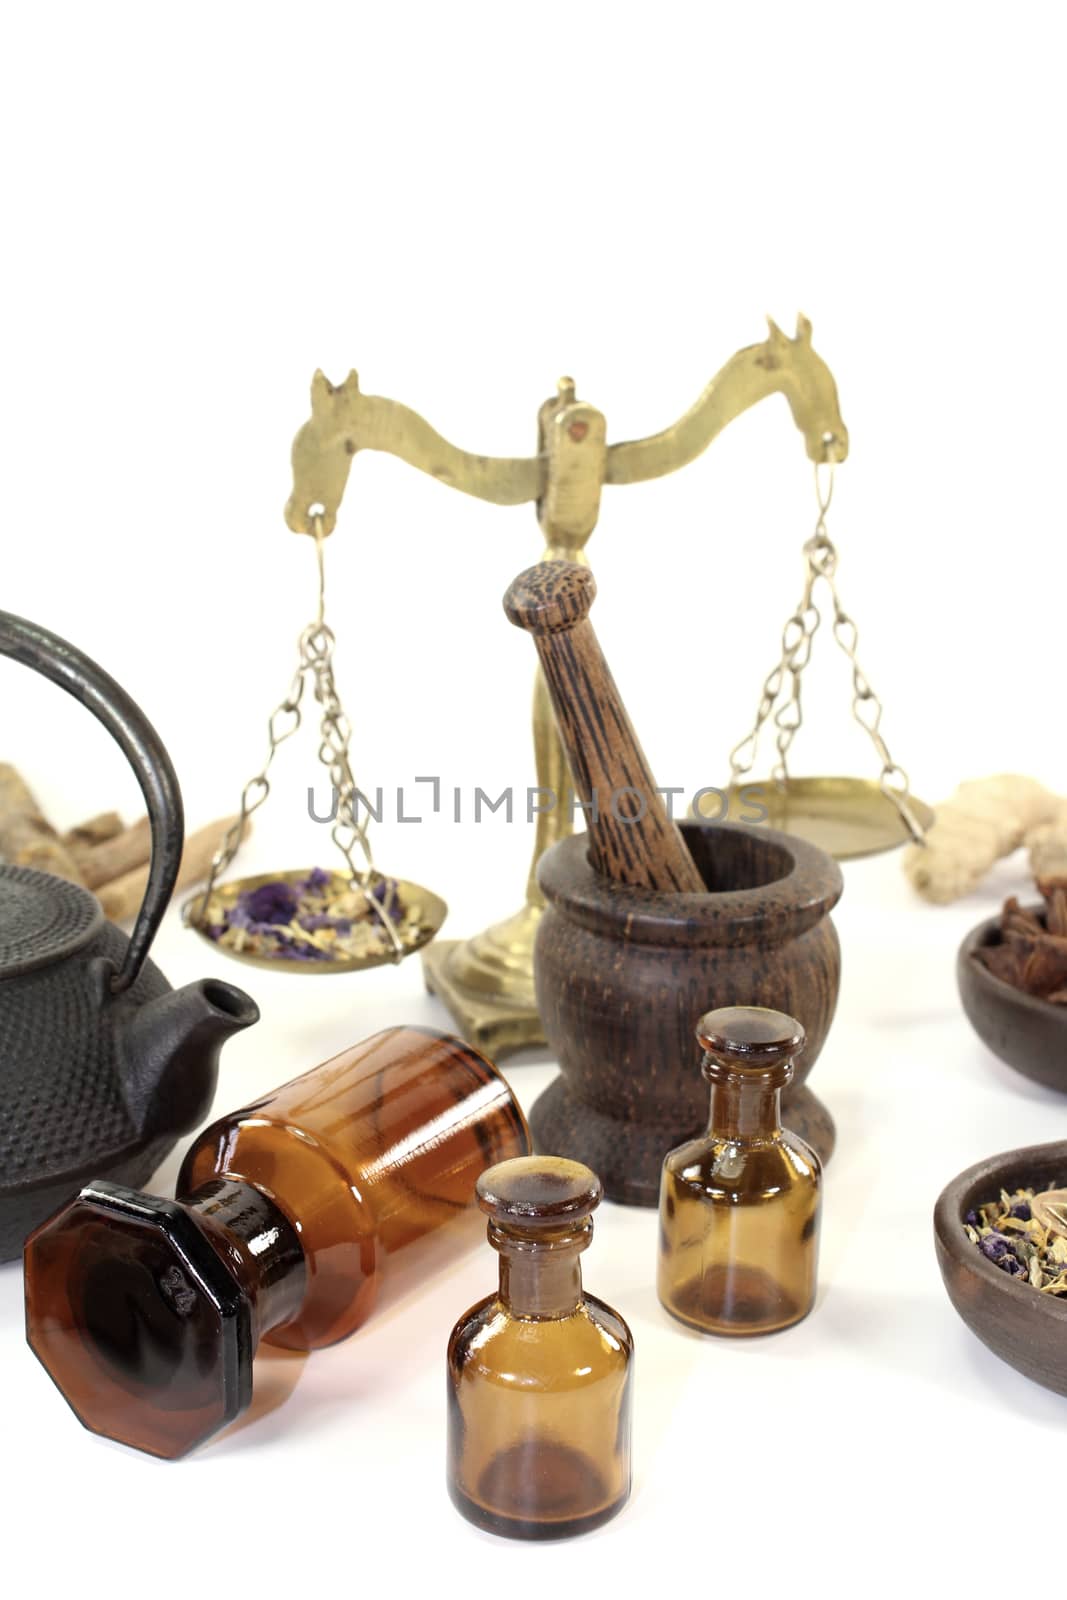 Chinese medicine with mortar and teapot on light background